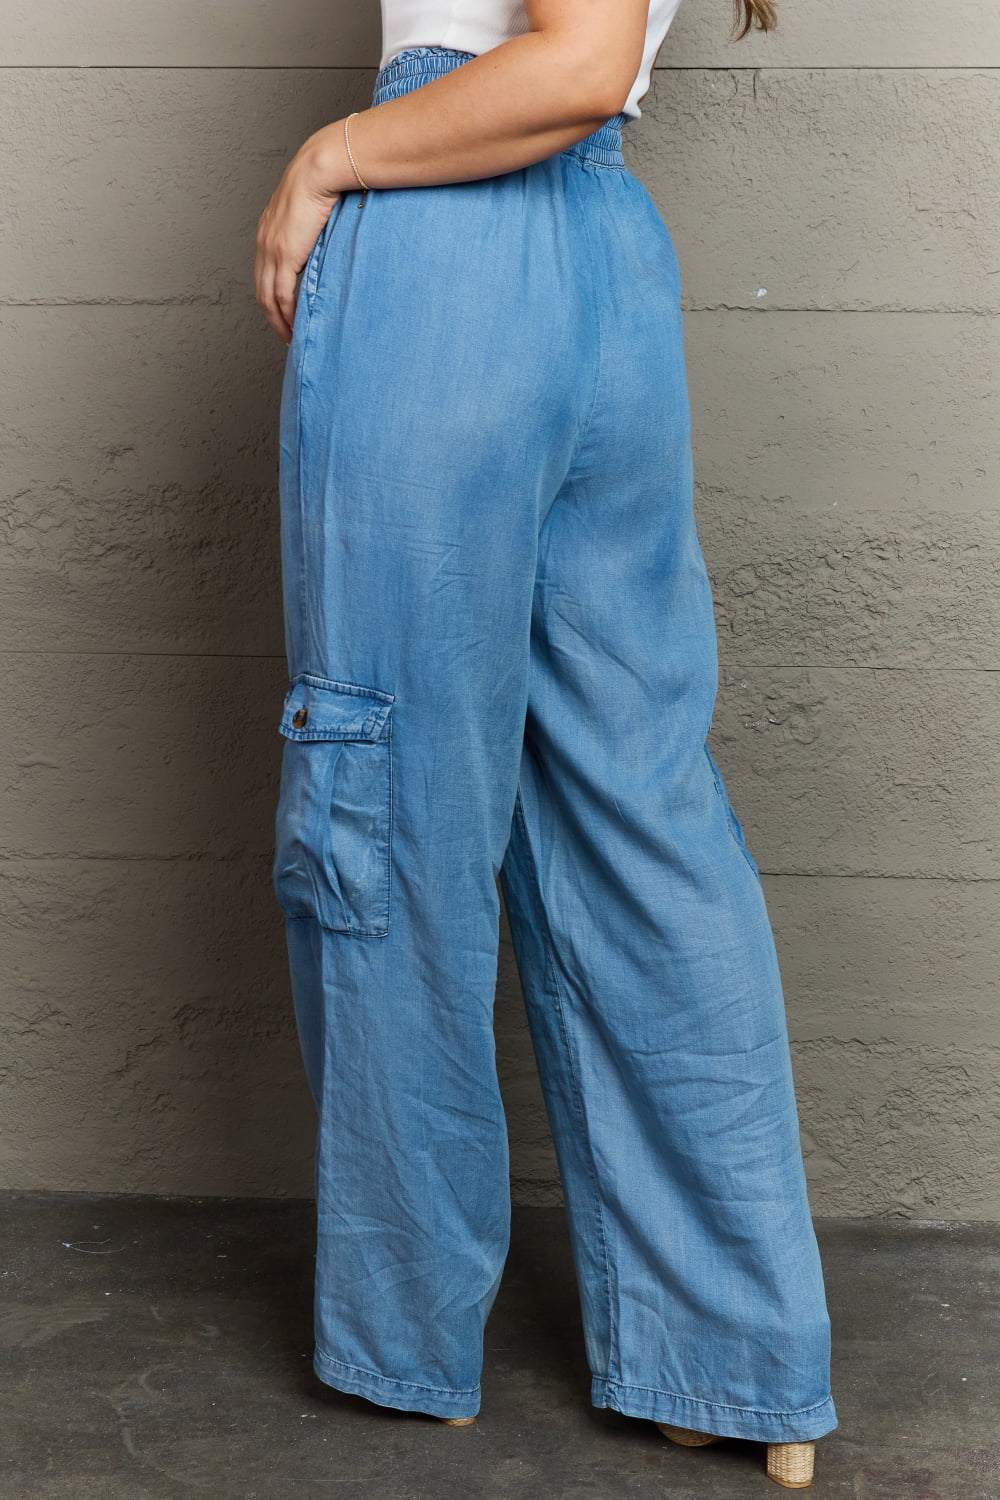 Out Of Site Full Size Denim Cargo Pants - Bottoms - Pants - 2 - 2024